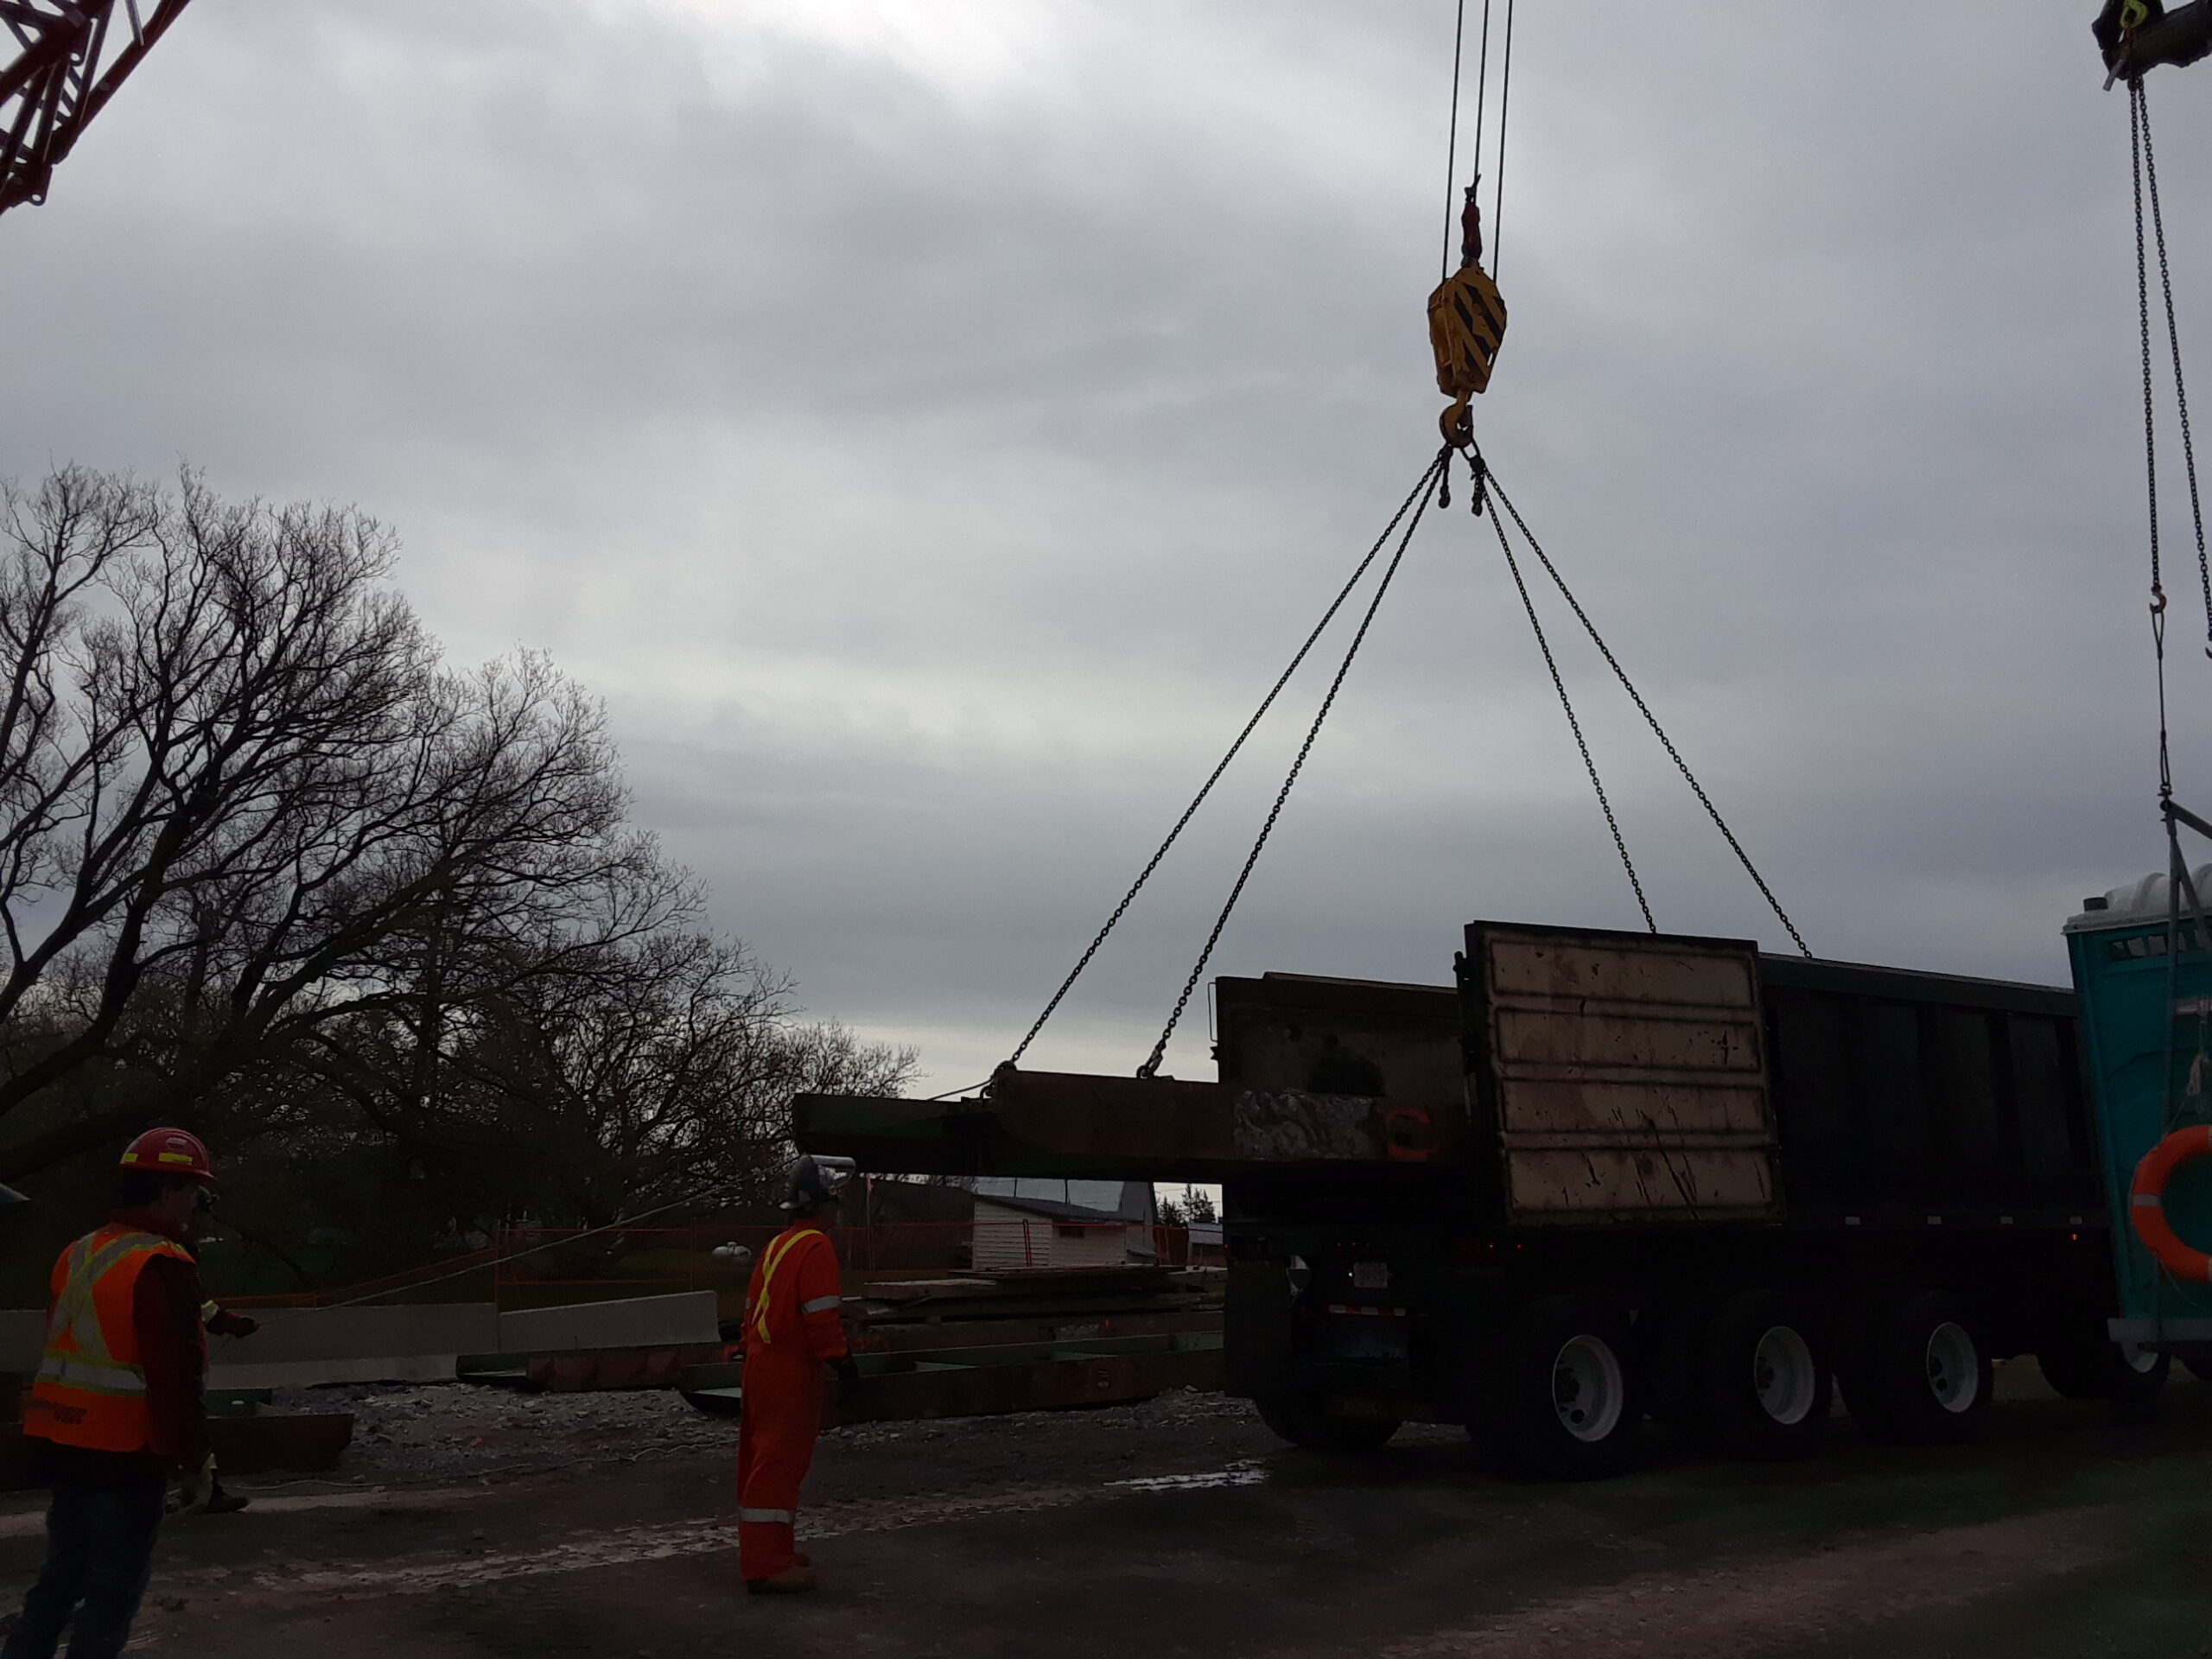 Loading the dismantled girder sections for removal from site